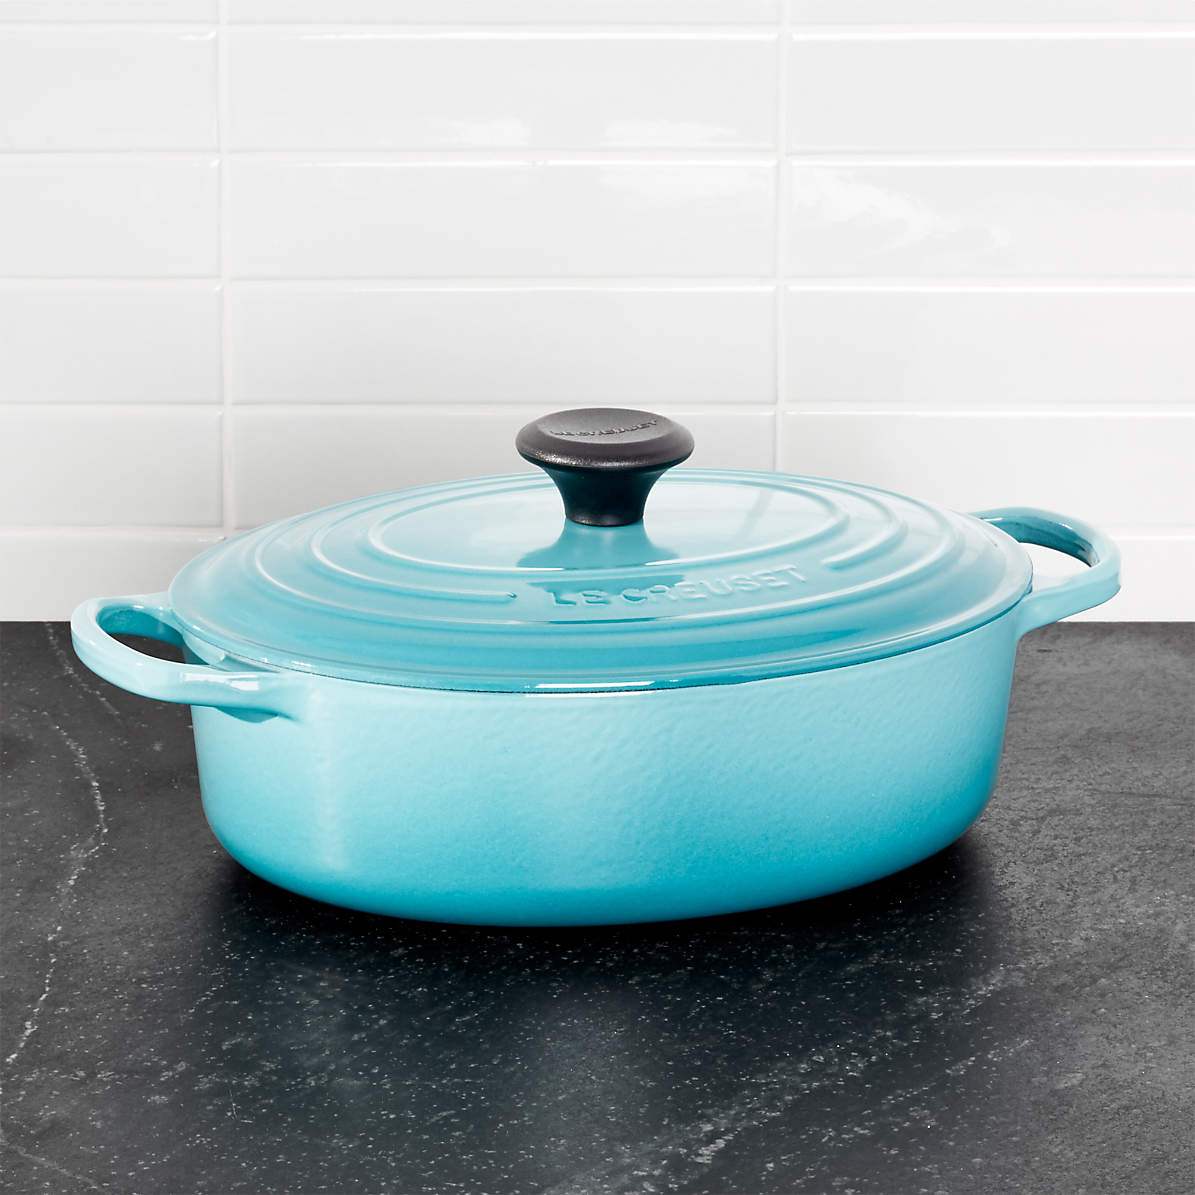 Le Creuset - Signature Wide French Oven